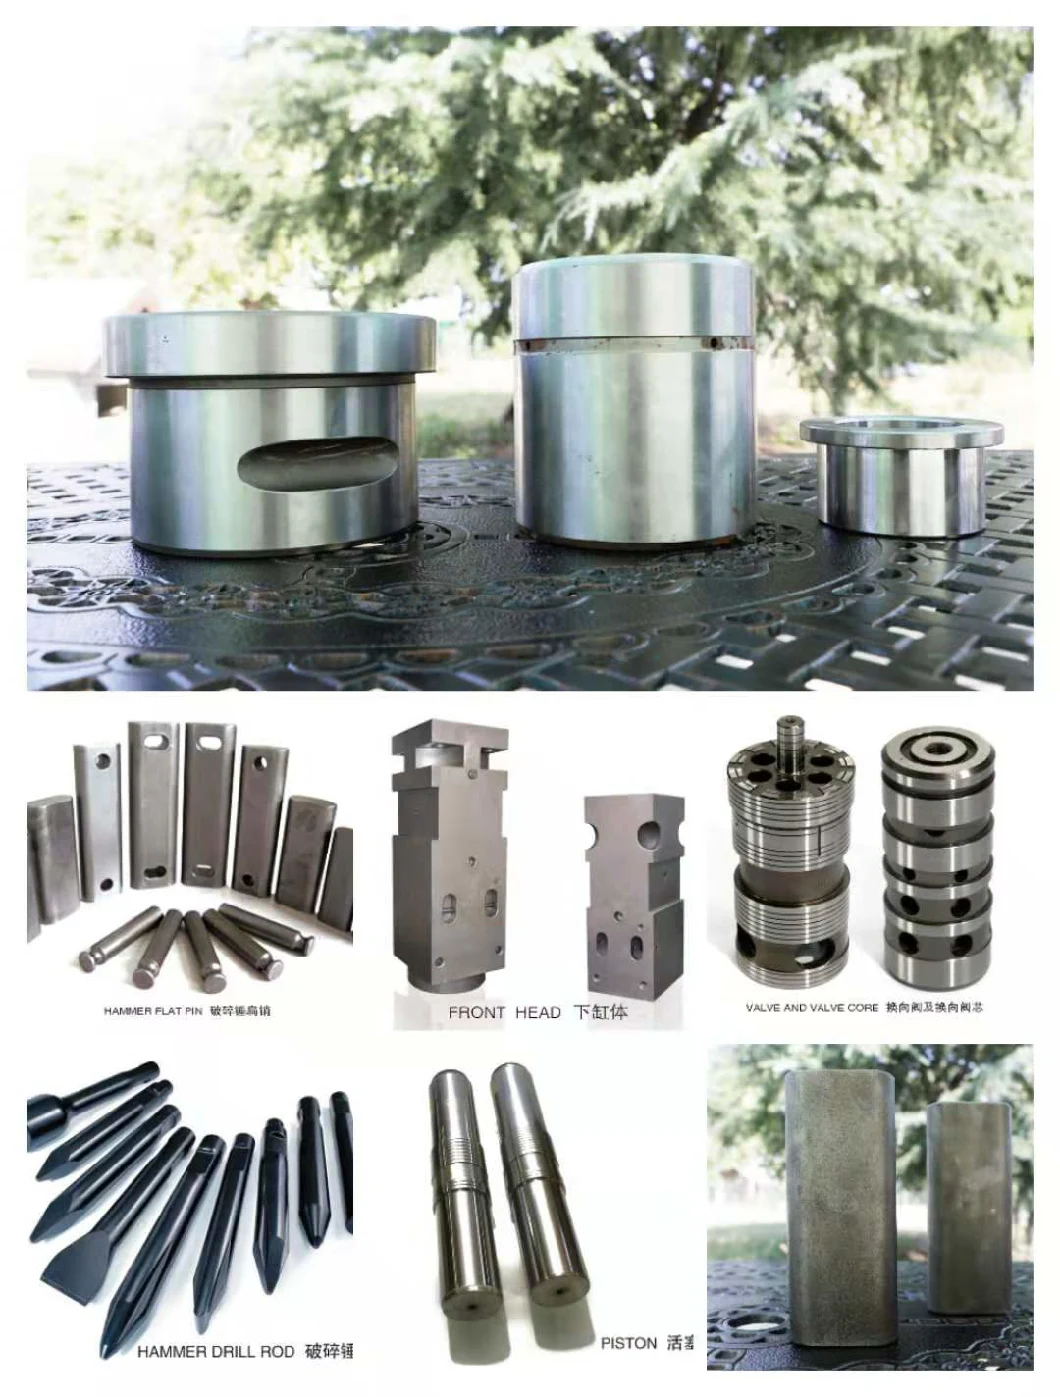 High Quality Threaded Carter Special Flange Type Tee Cast Iron Pipe From Chinese Manufacturer